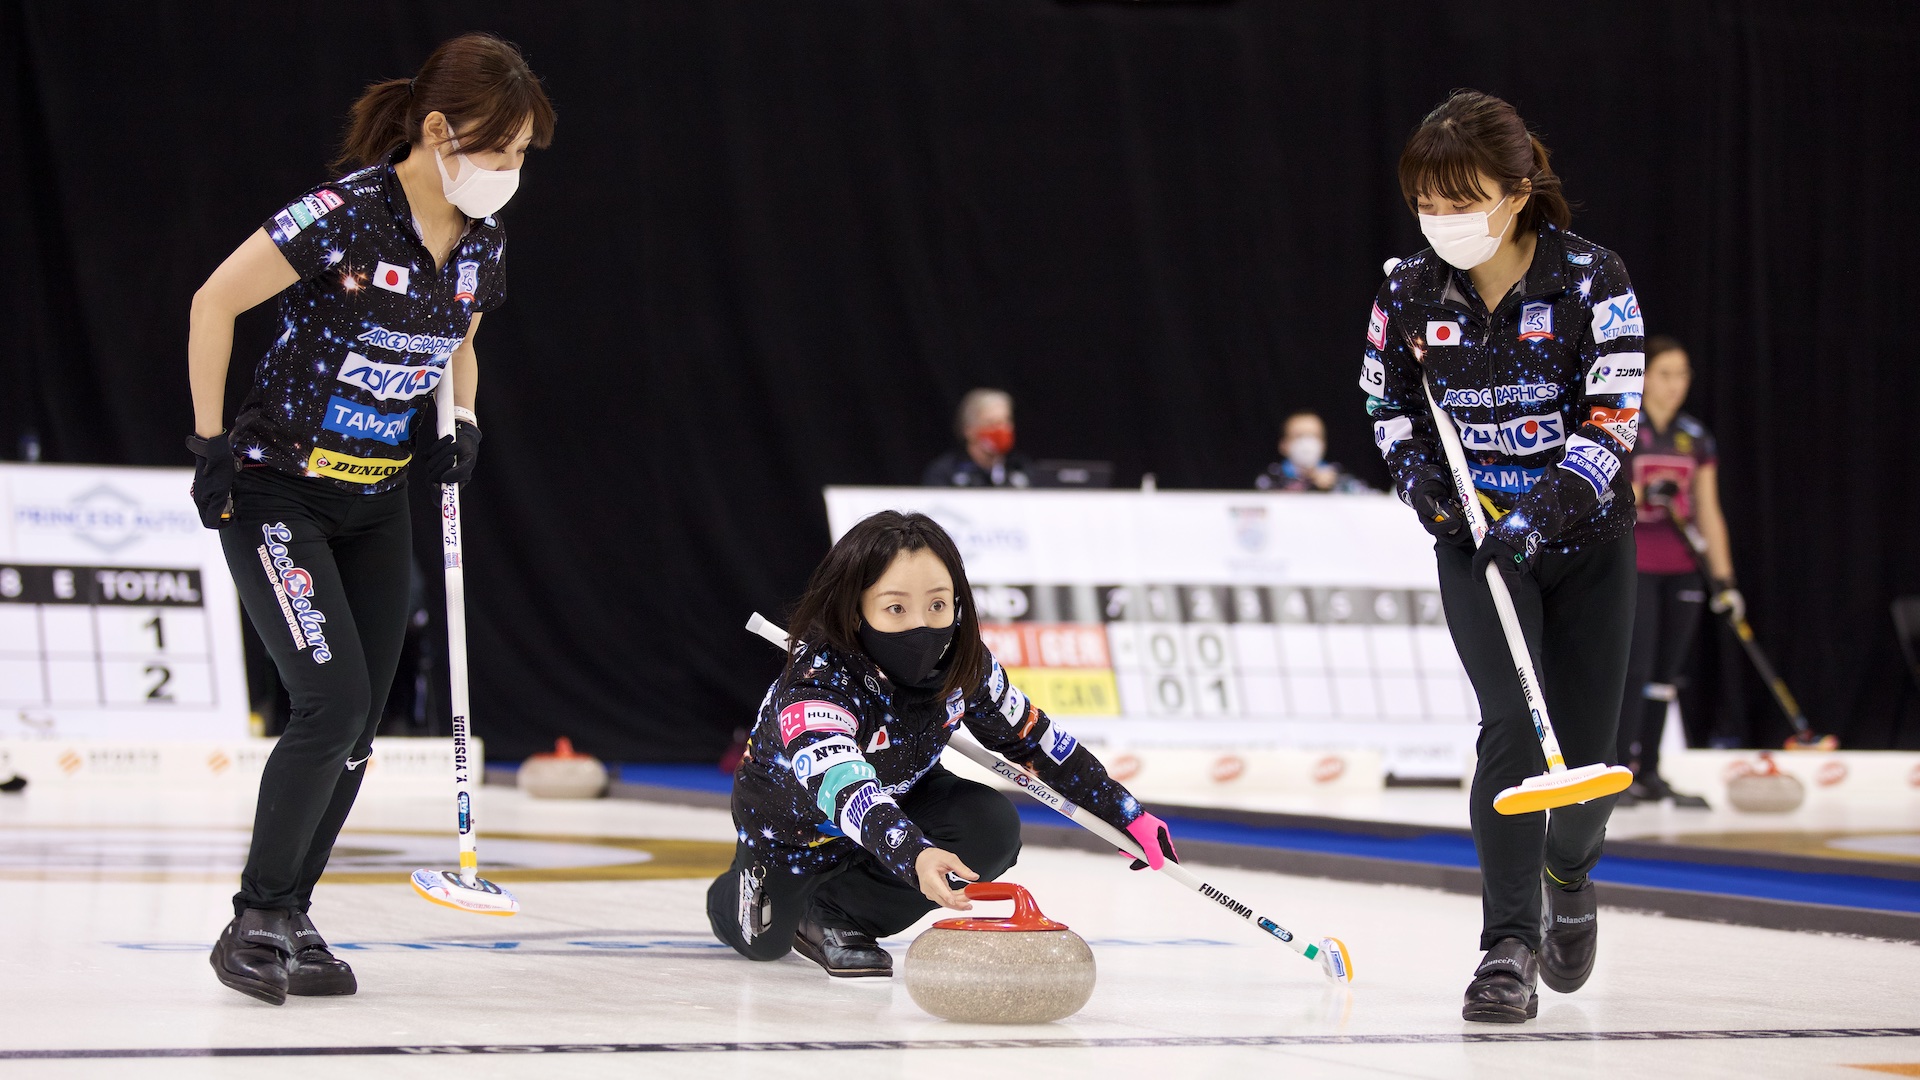 CurlingZone Fujisawa tops Walker to qualify for B Final at Players